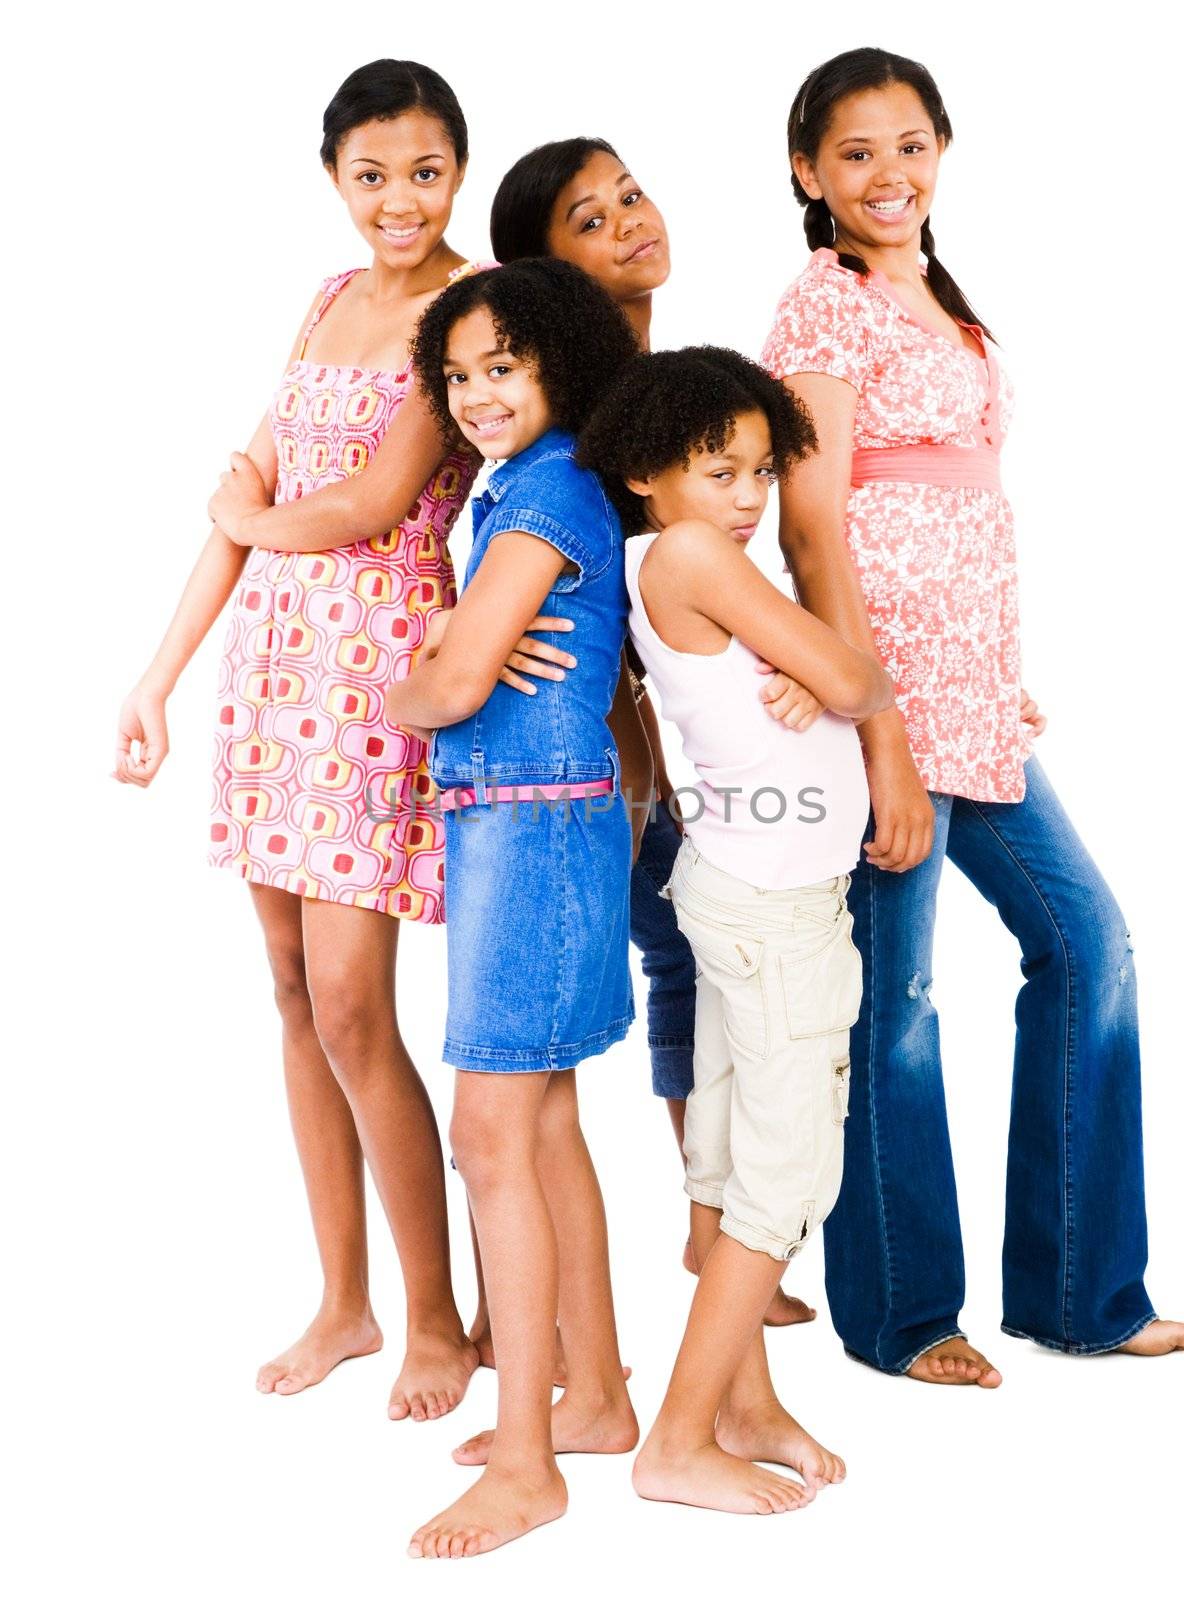 Girls standing with teenage girls and smiling isolated over white